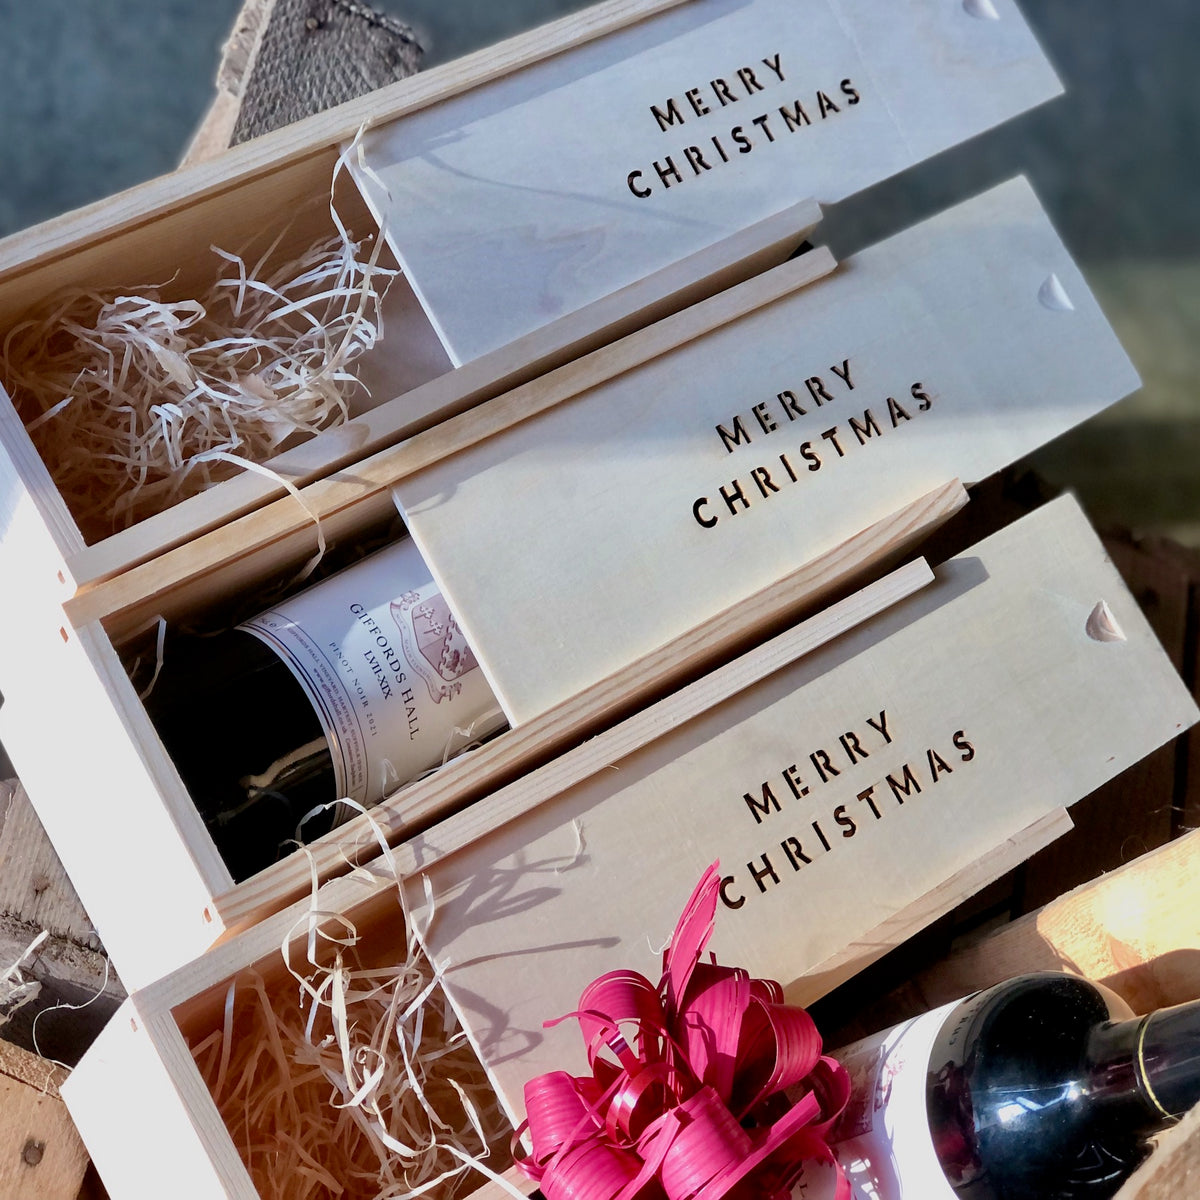 Merry Christmas box with a bottle of Giffords Hall wine